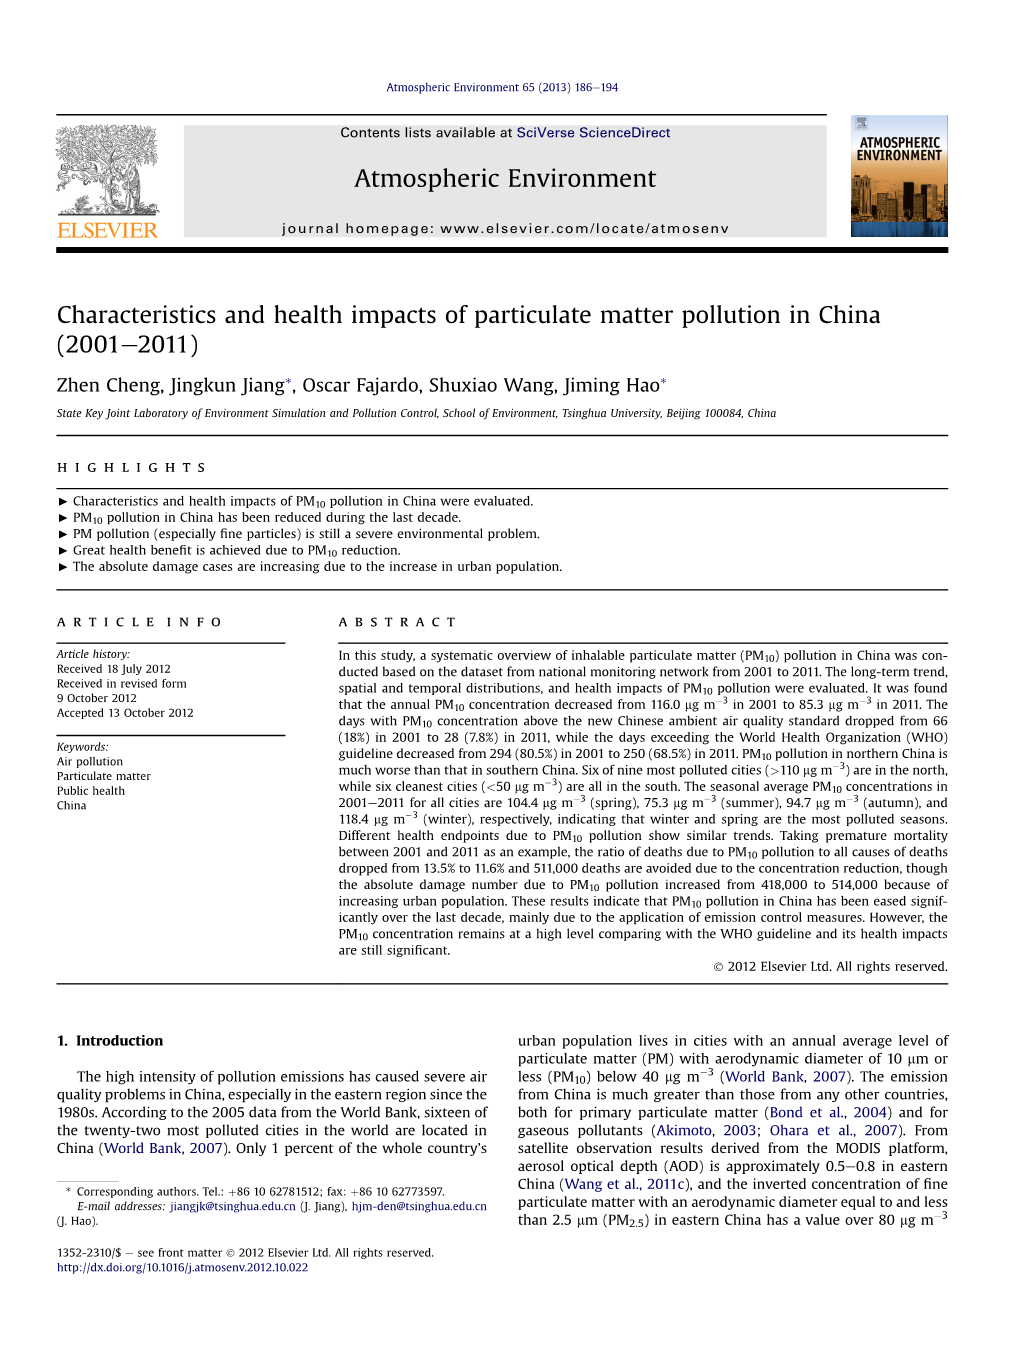 Characteristics and Health Impacts of Particulate Matter Pollution in China (2001E2011)